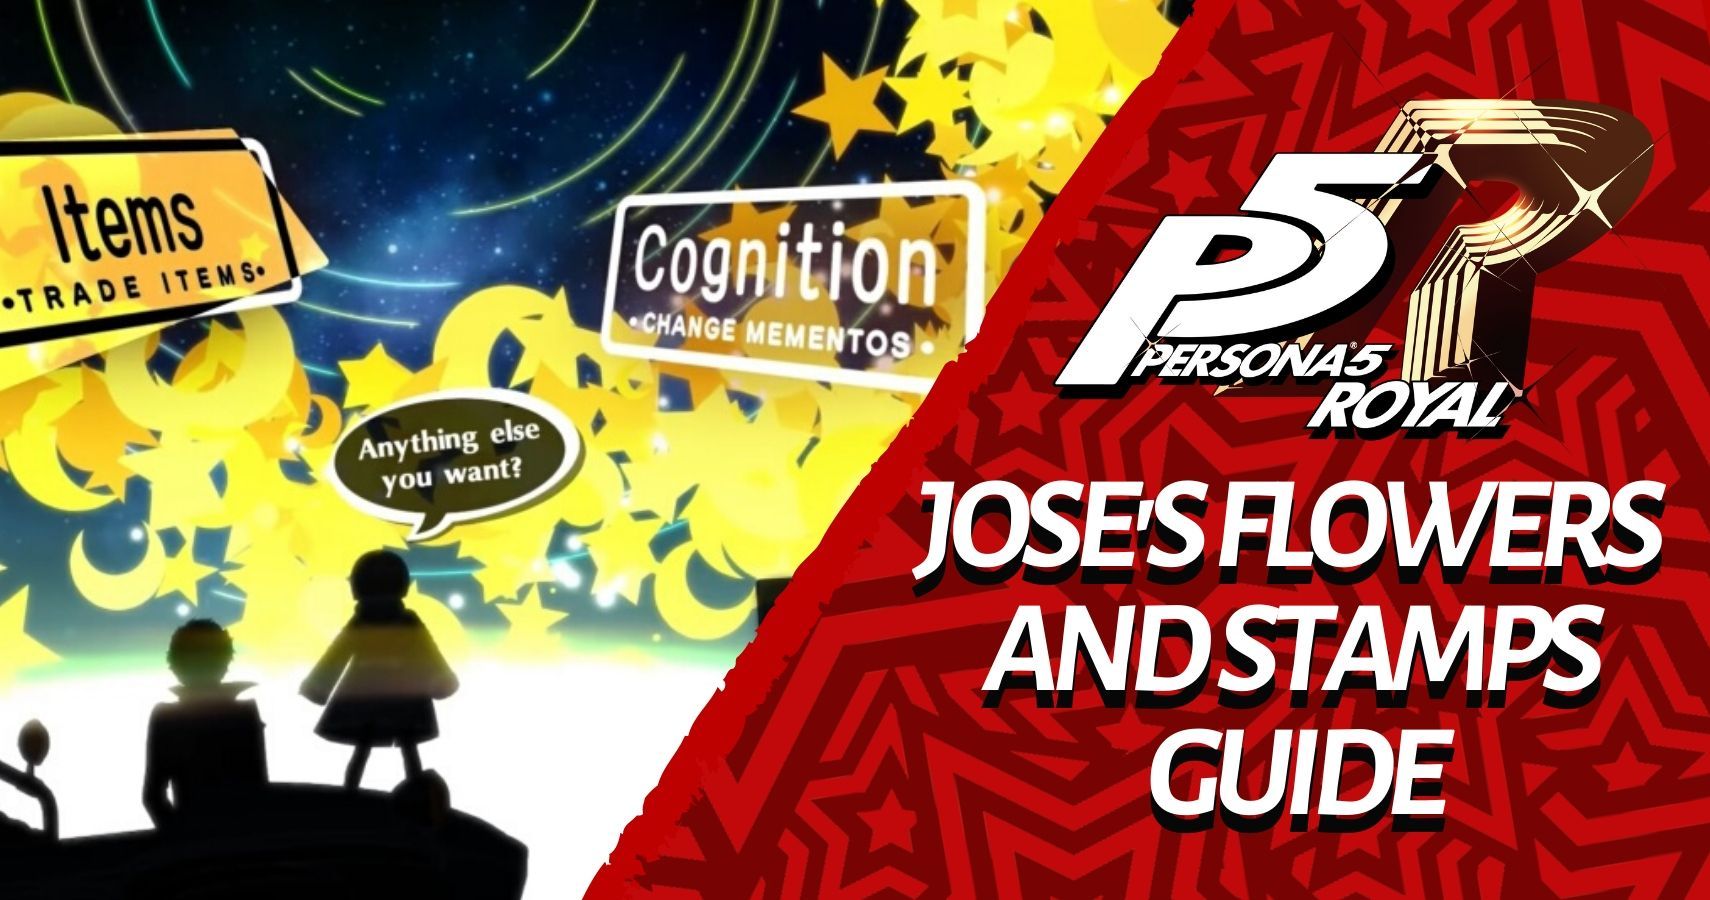 Persona 5 Royal Joses Flowers And Stamps Guide